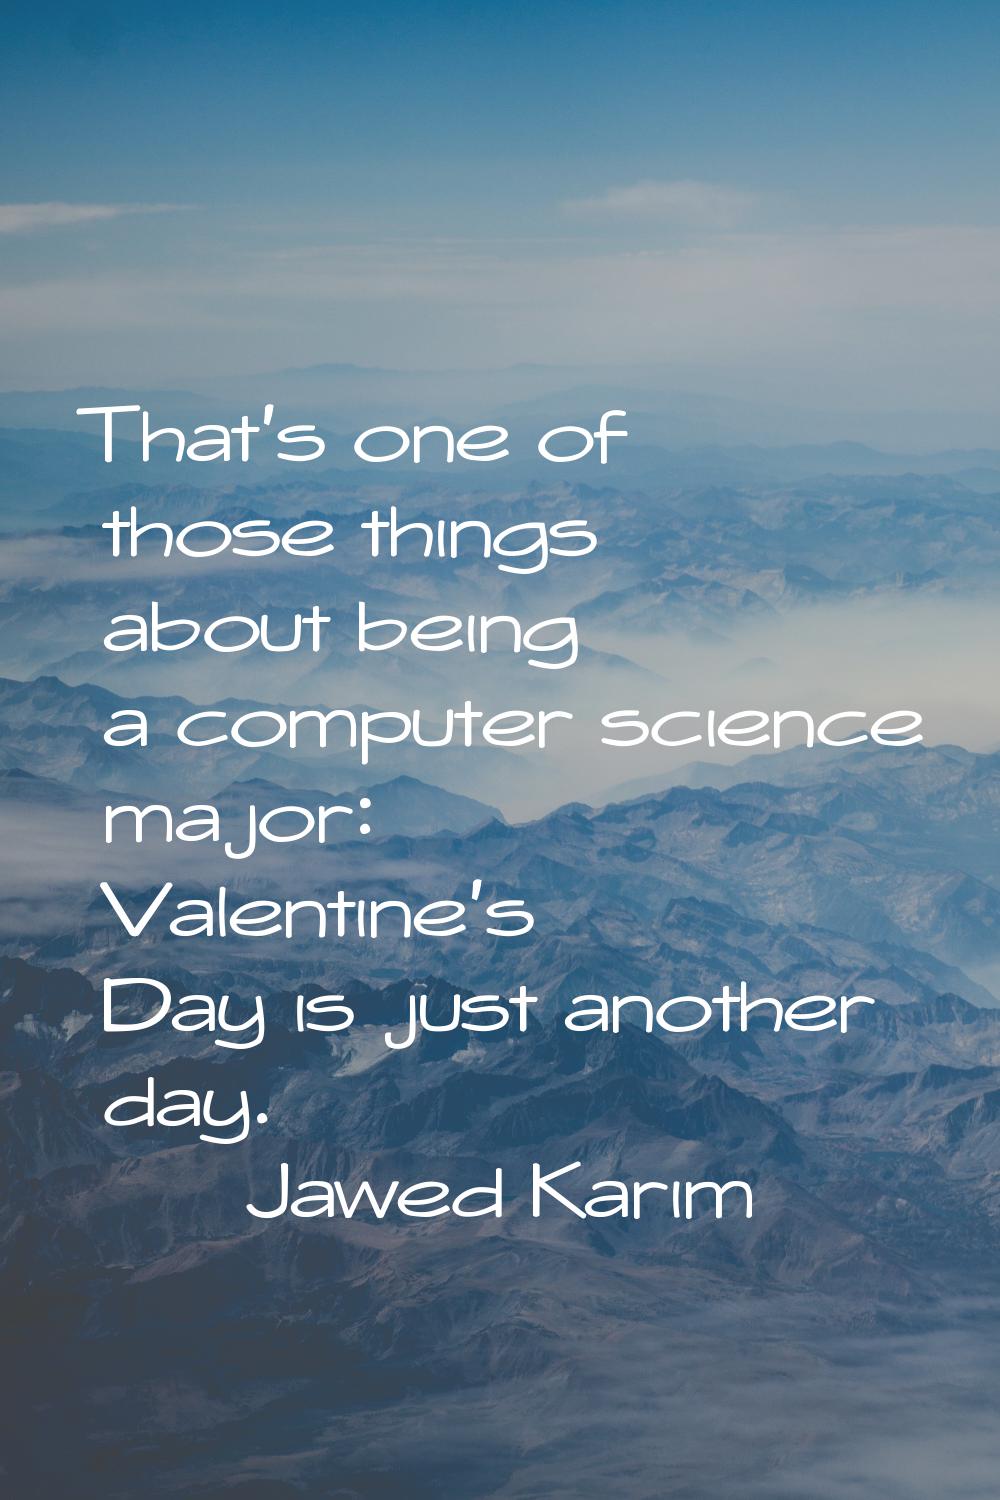 That's one of those things about being a computer science major: Valentine's Day is just another da